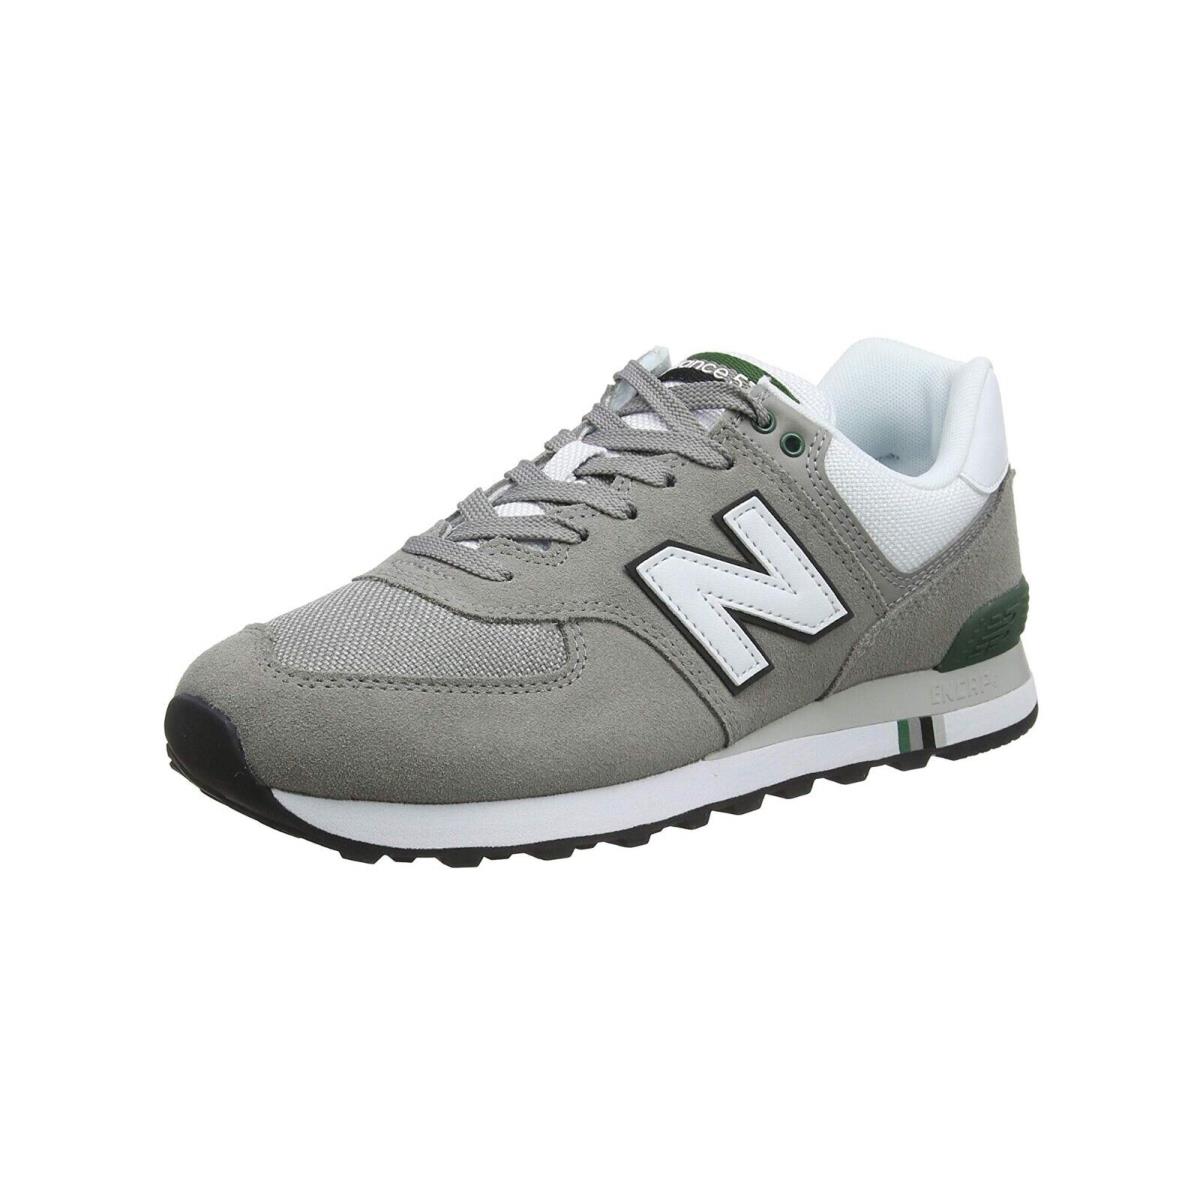 New Balance 574 Men`s Classic Shoes Sneakers ML574MTG - Marblehead/green